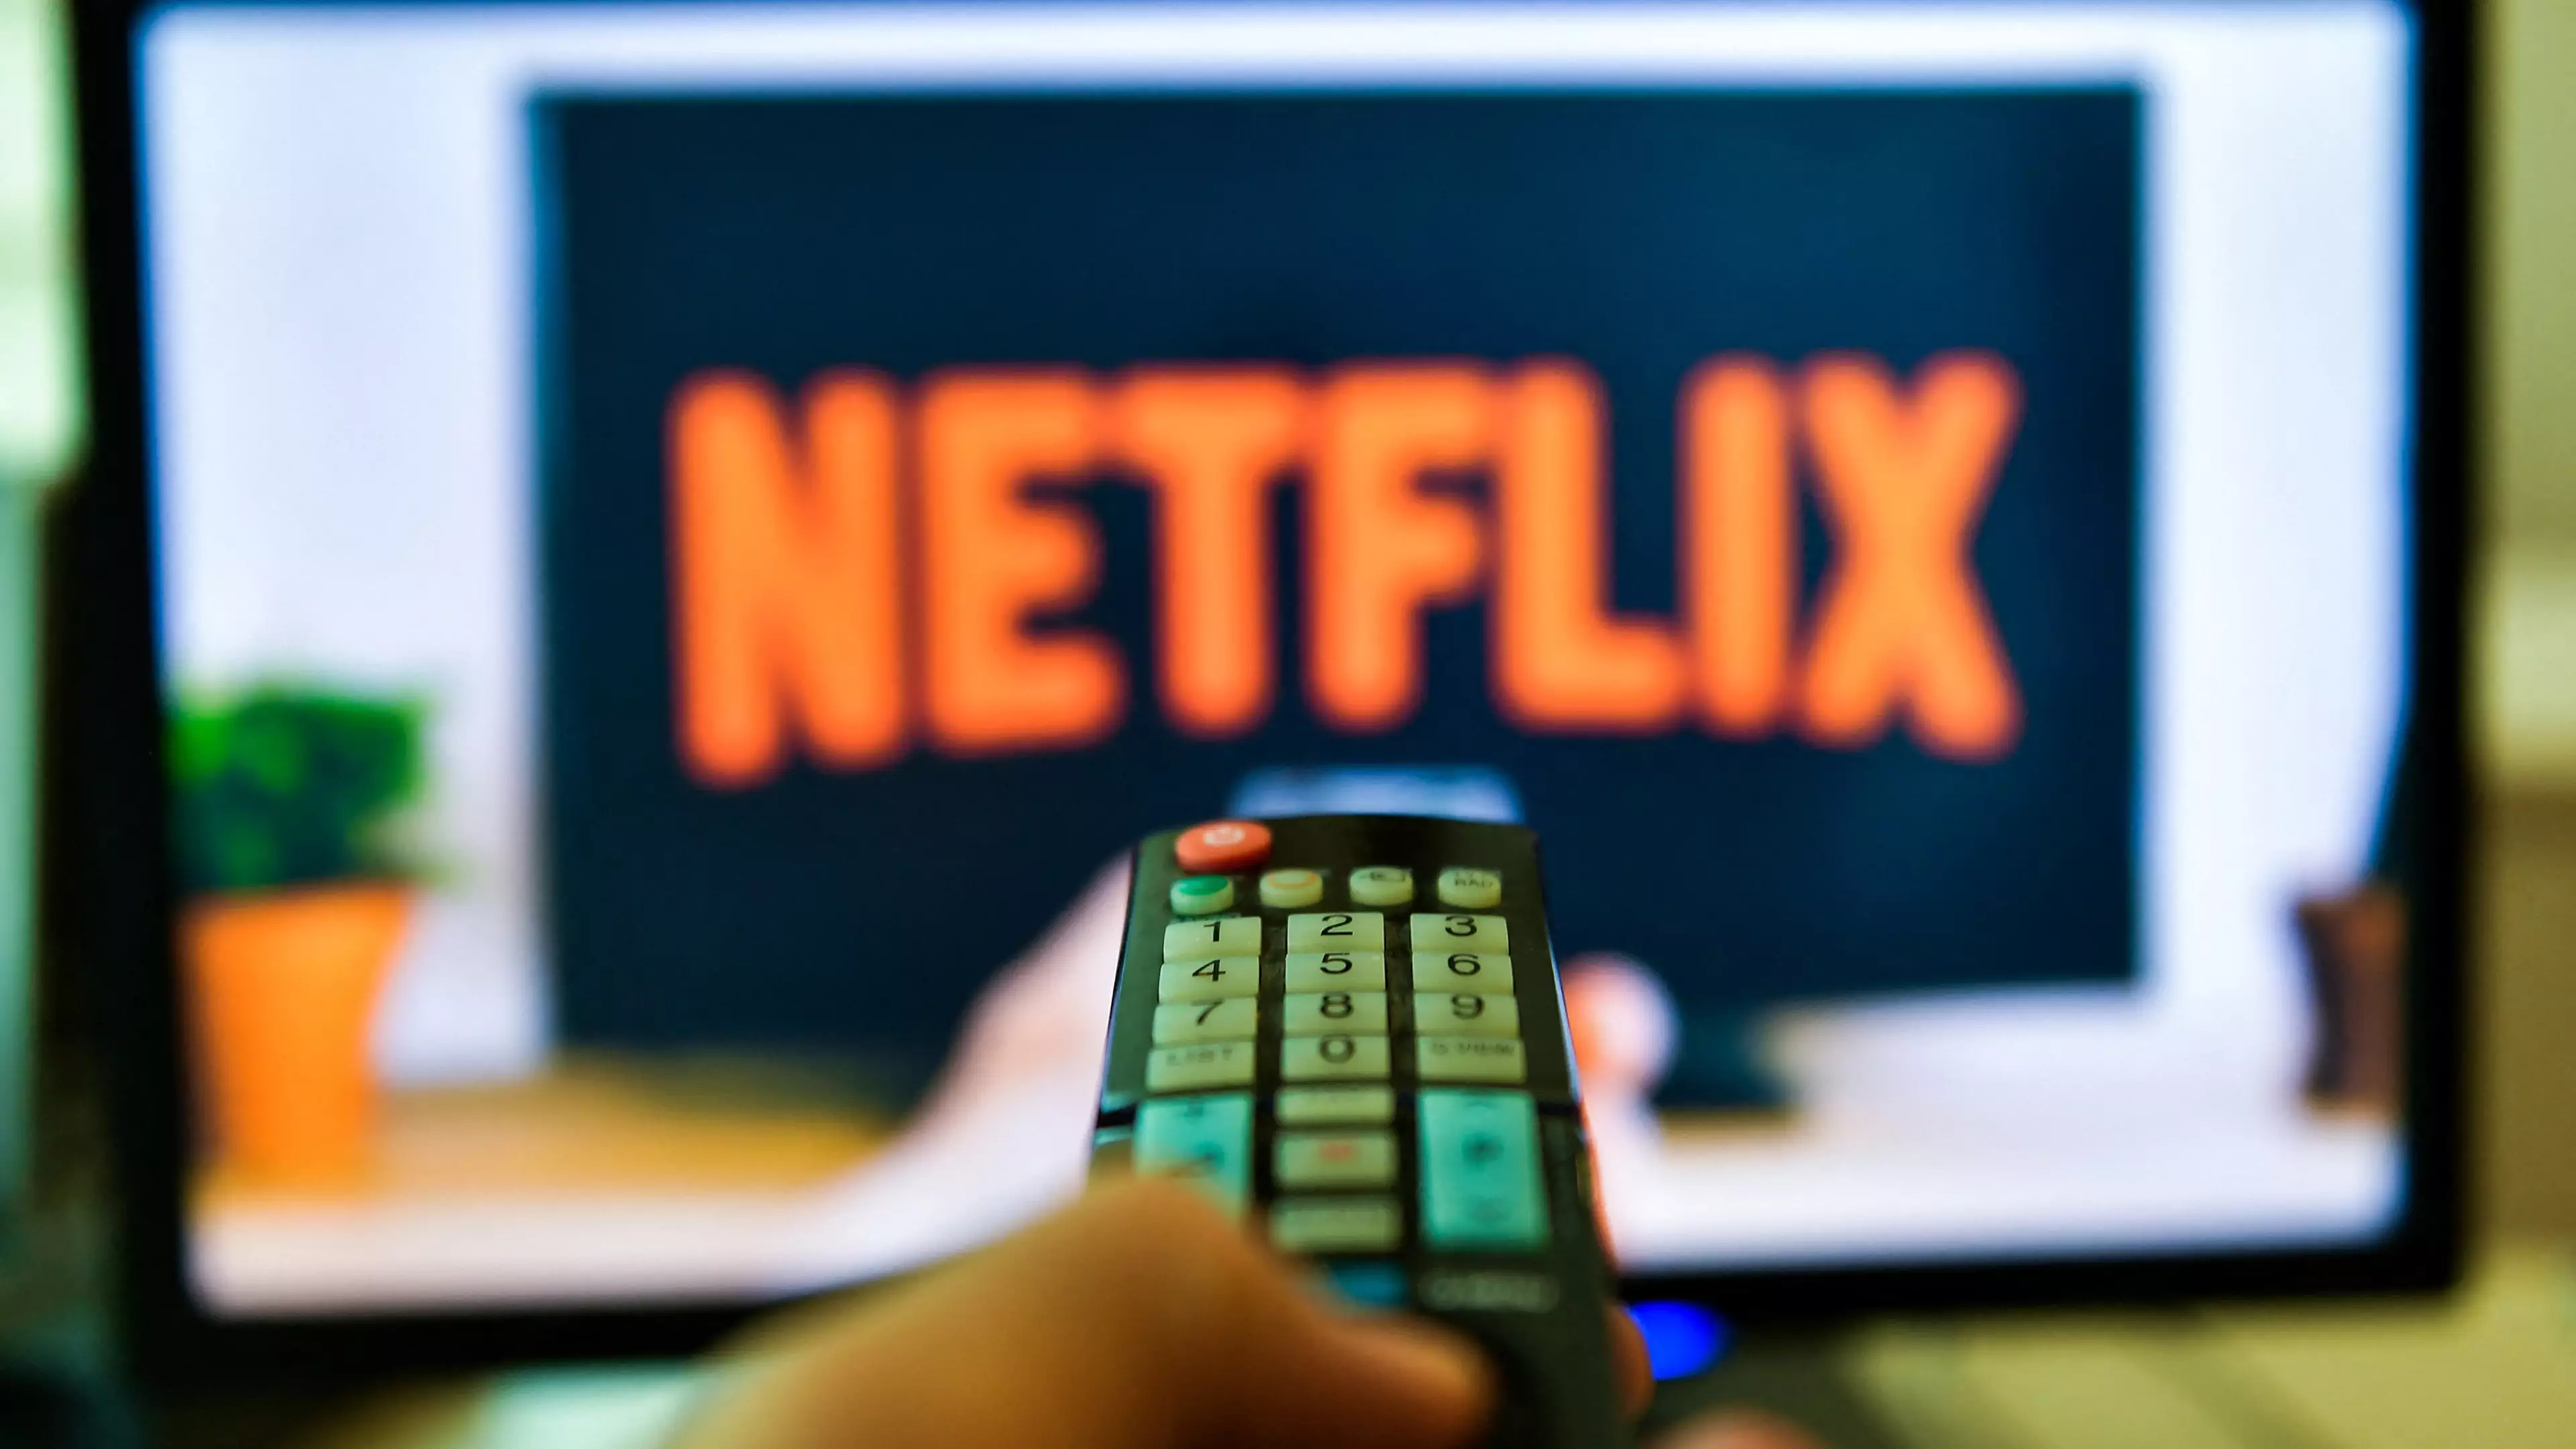 Netflix To Reduce Streaming Quality In Europe Amid Increased Demand During Coronavirus